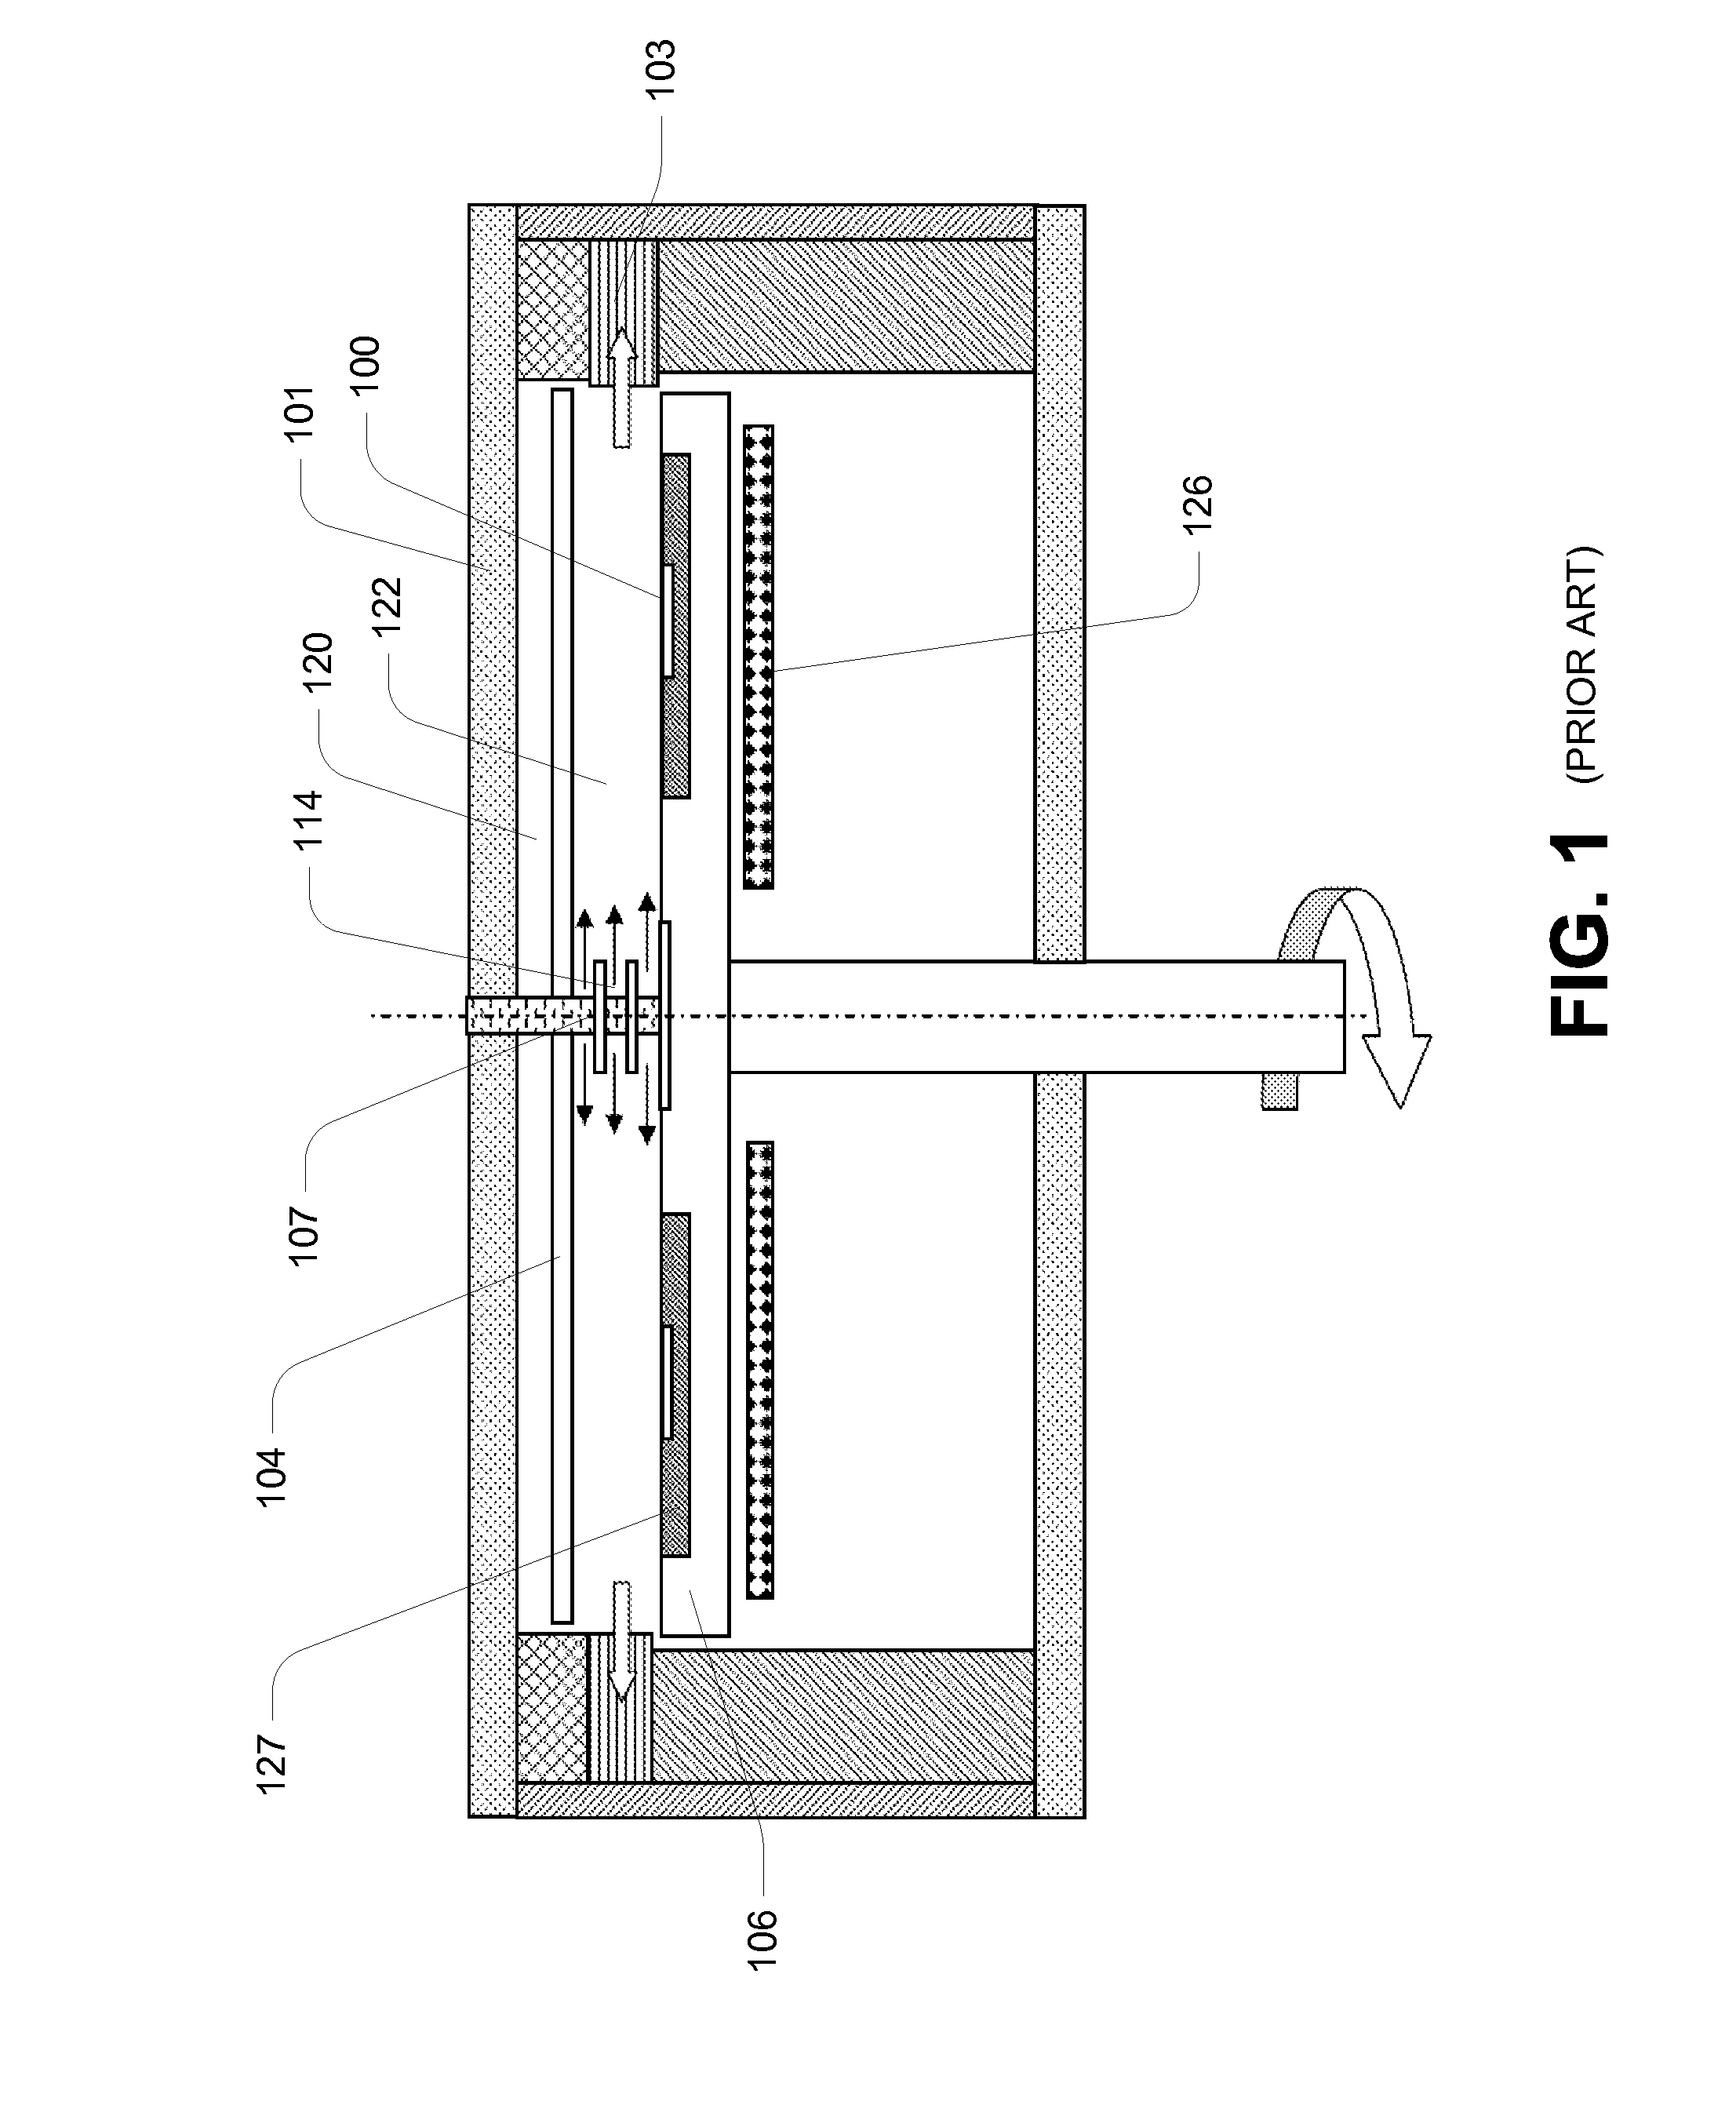 Chemical vapor deposition reactor and method